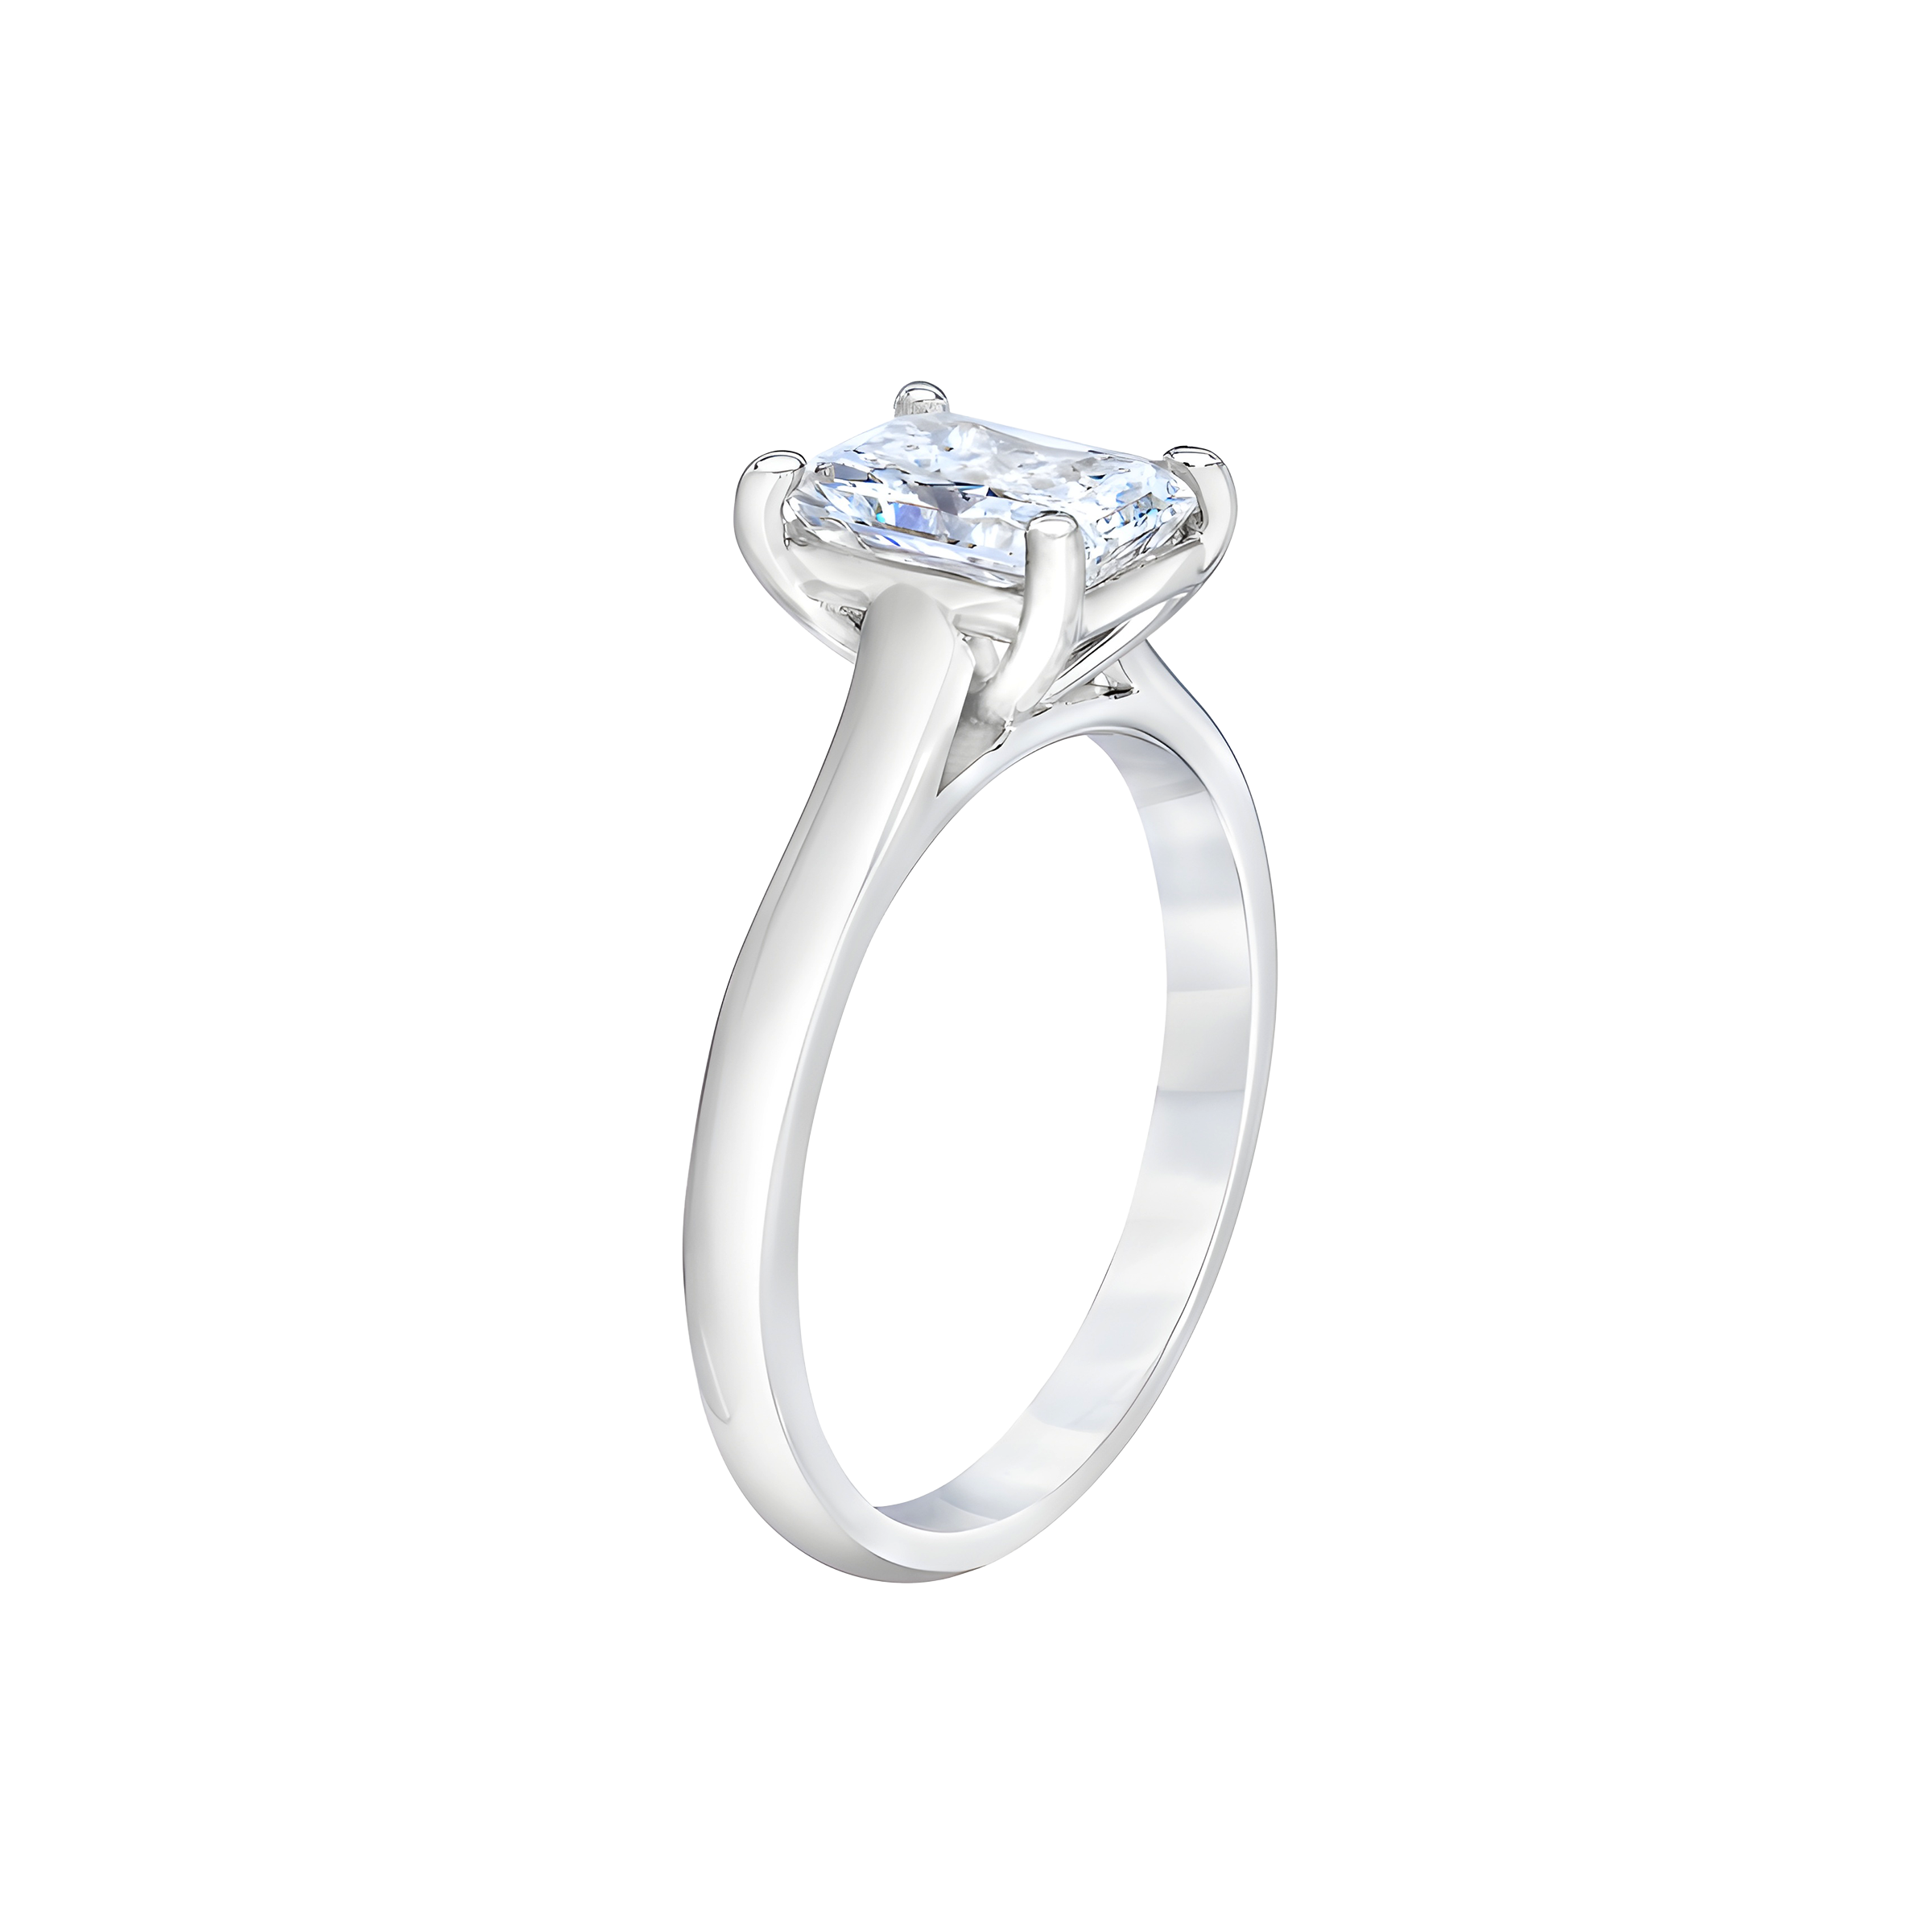 Radiant Cut Solitaire Diamond Engagement Ring in 18K White Gold